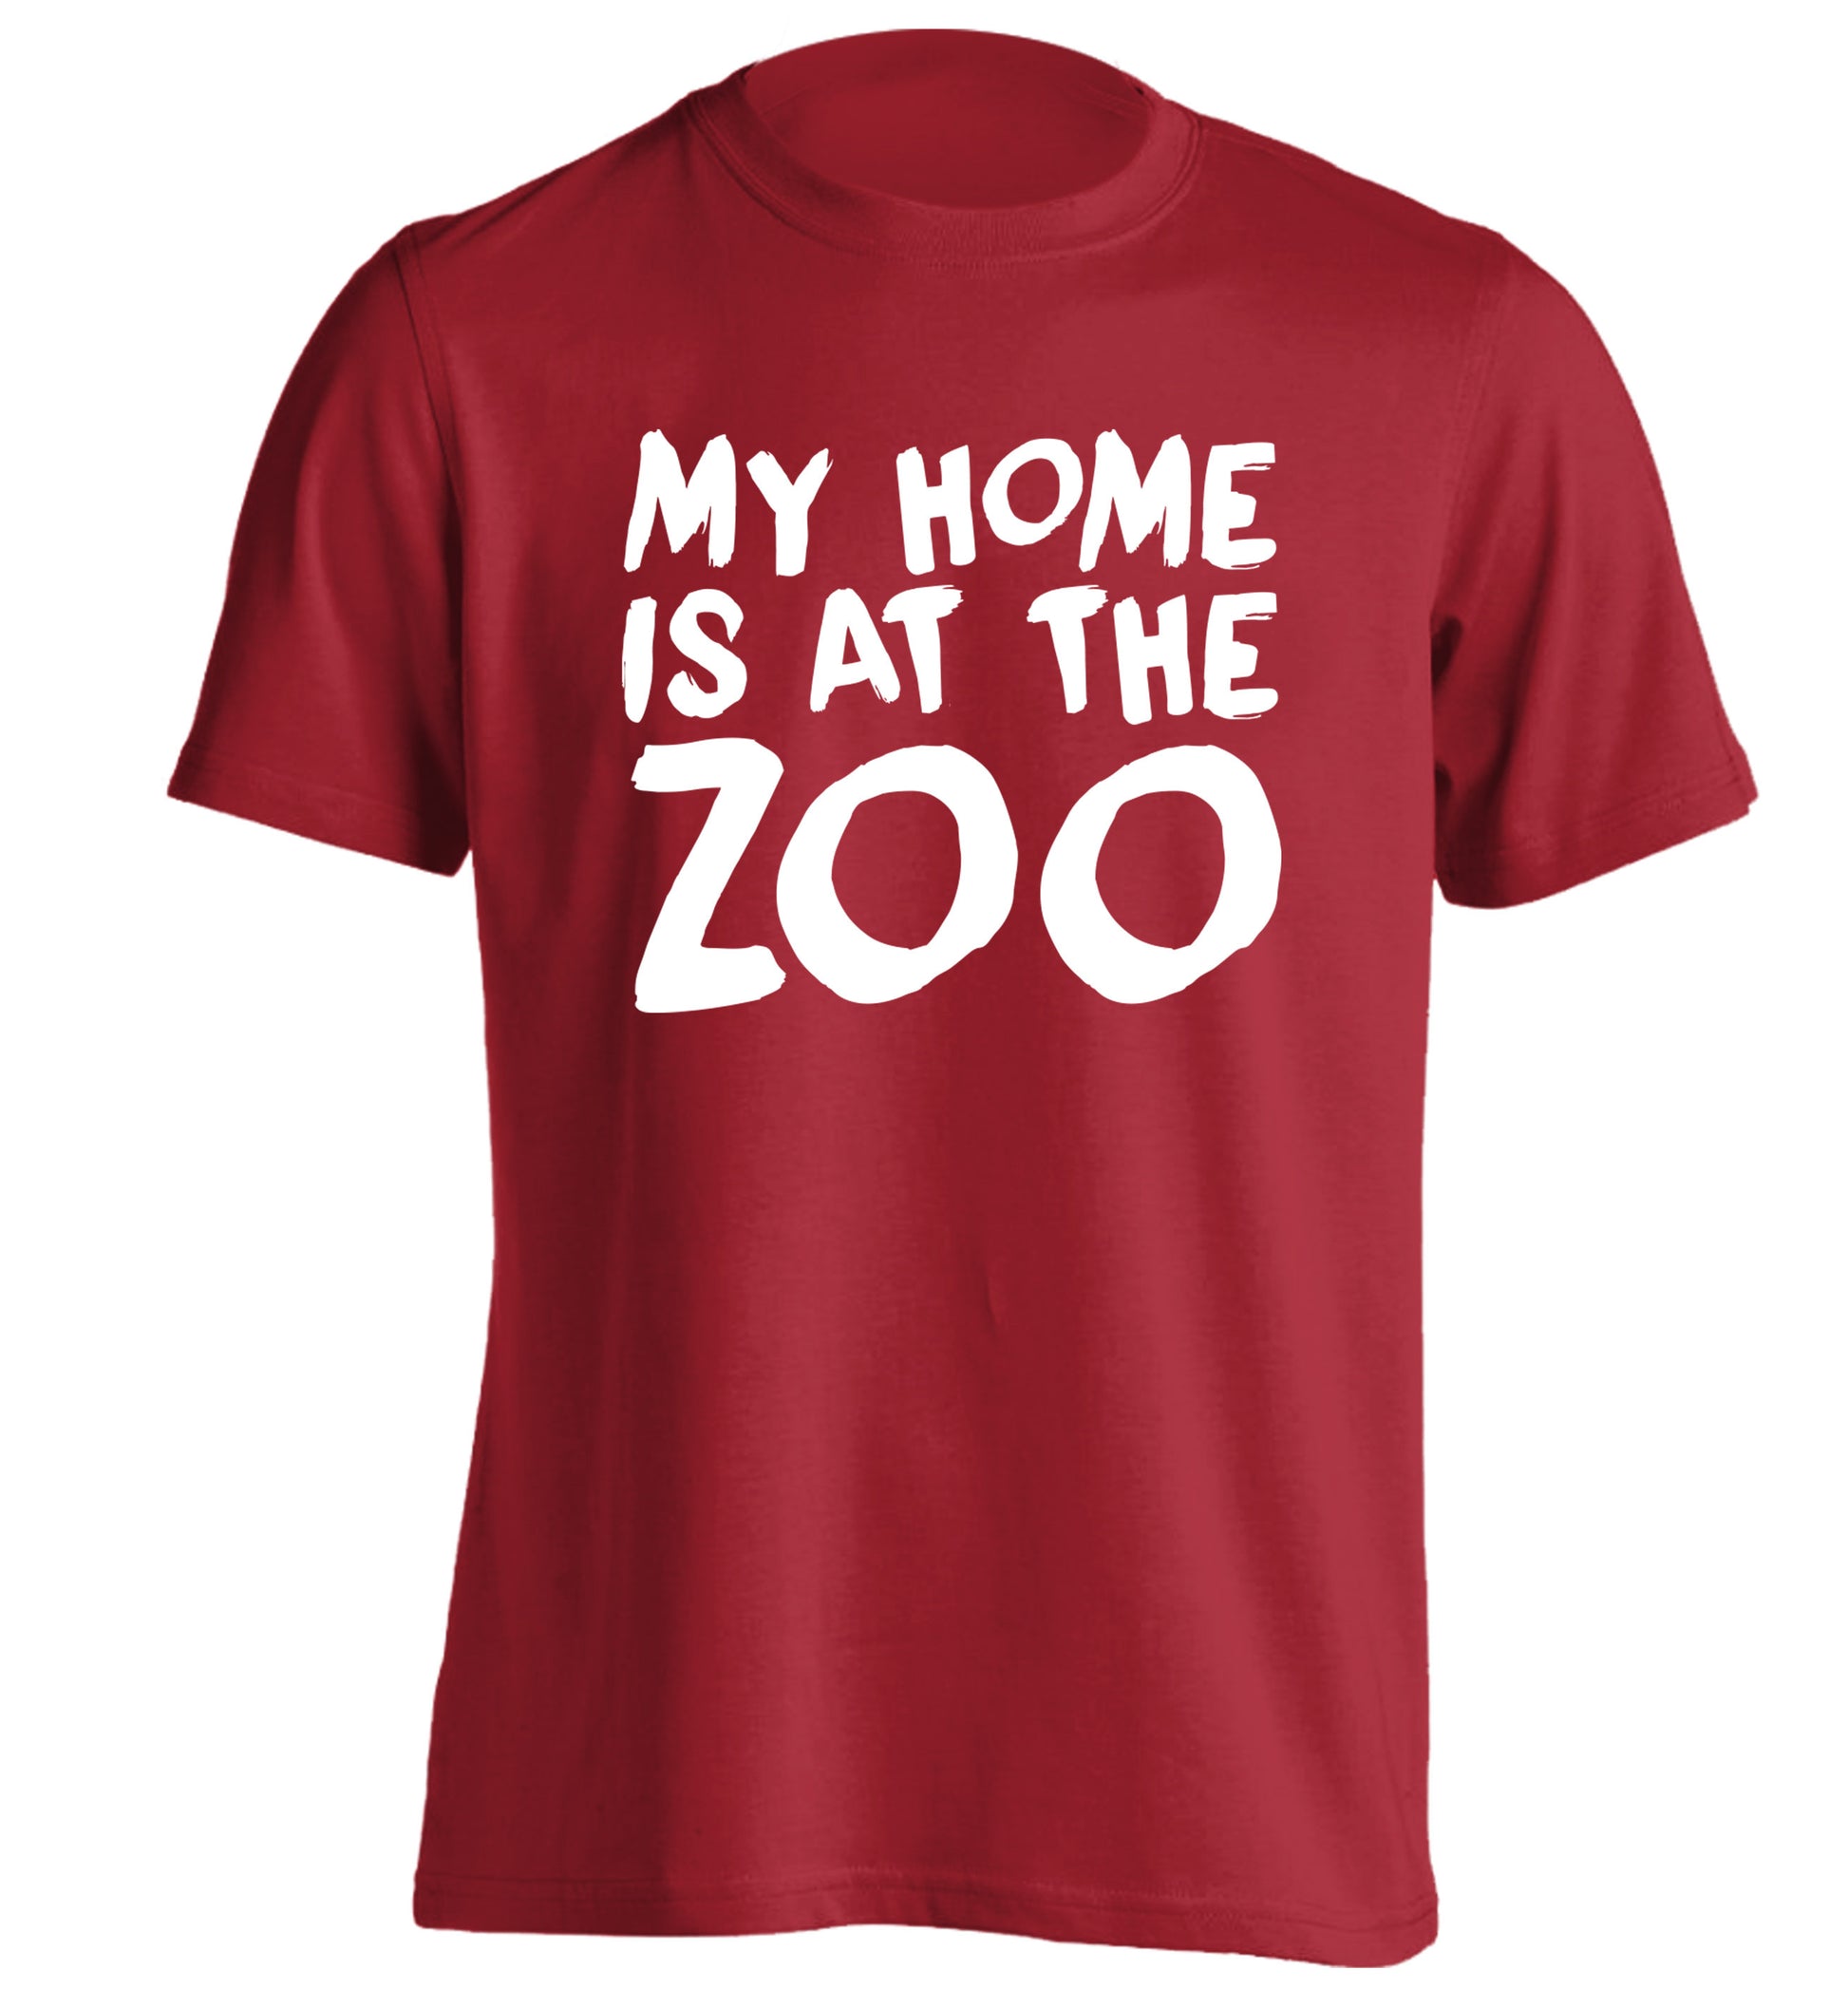 My home is at the zoo adults unisex red Tshirt 2XL